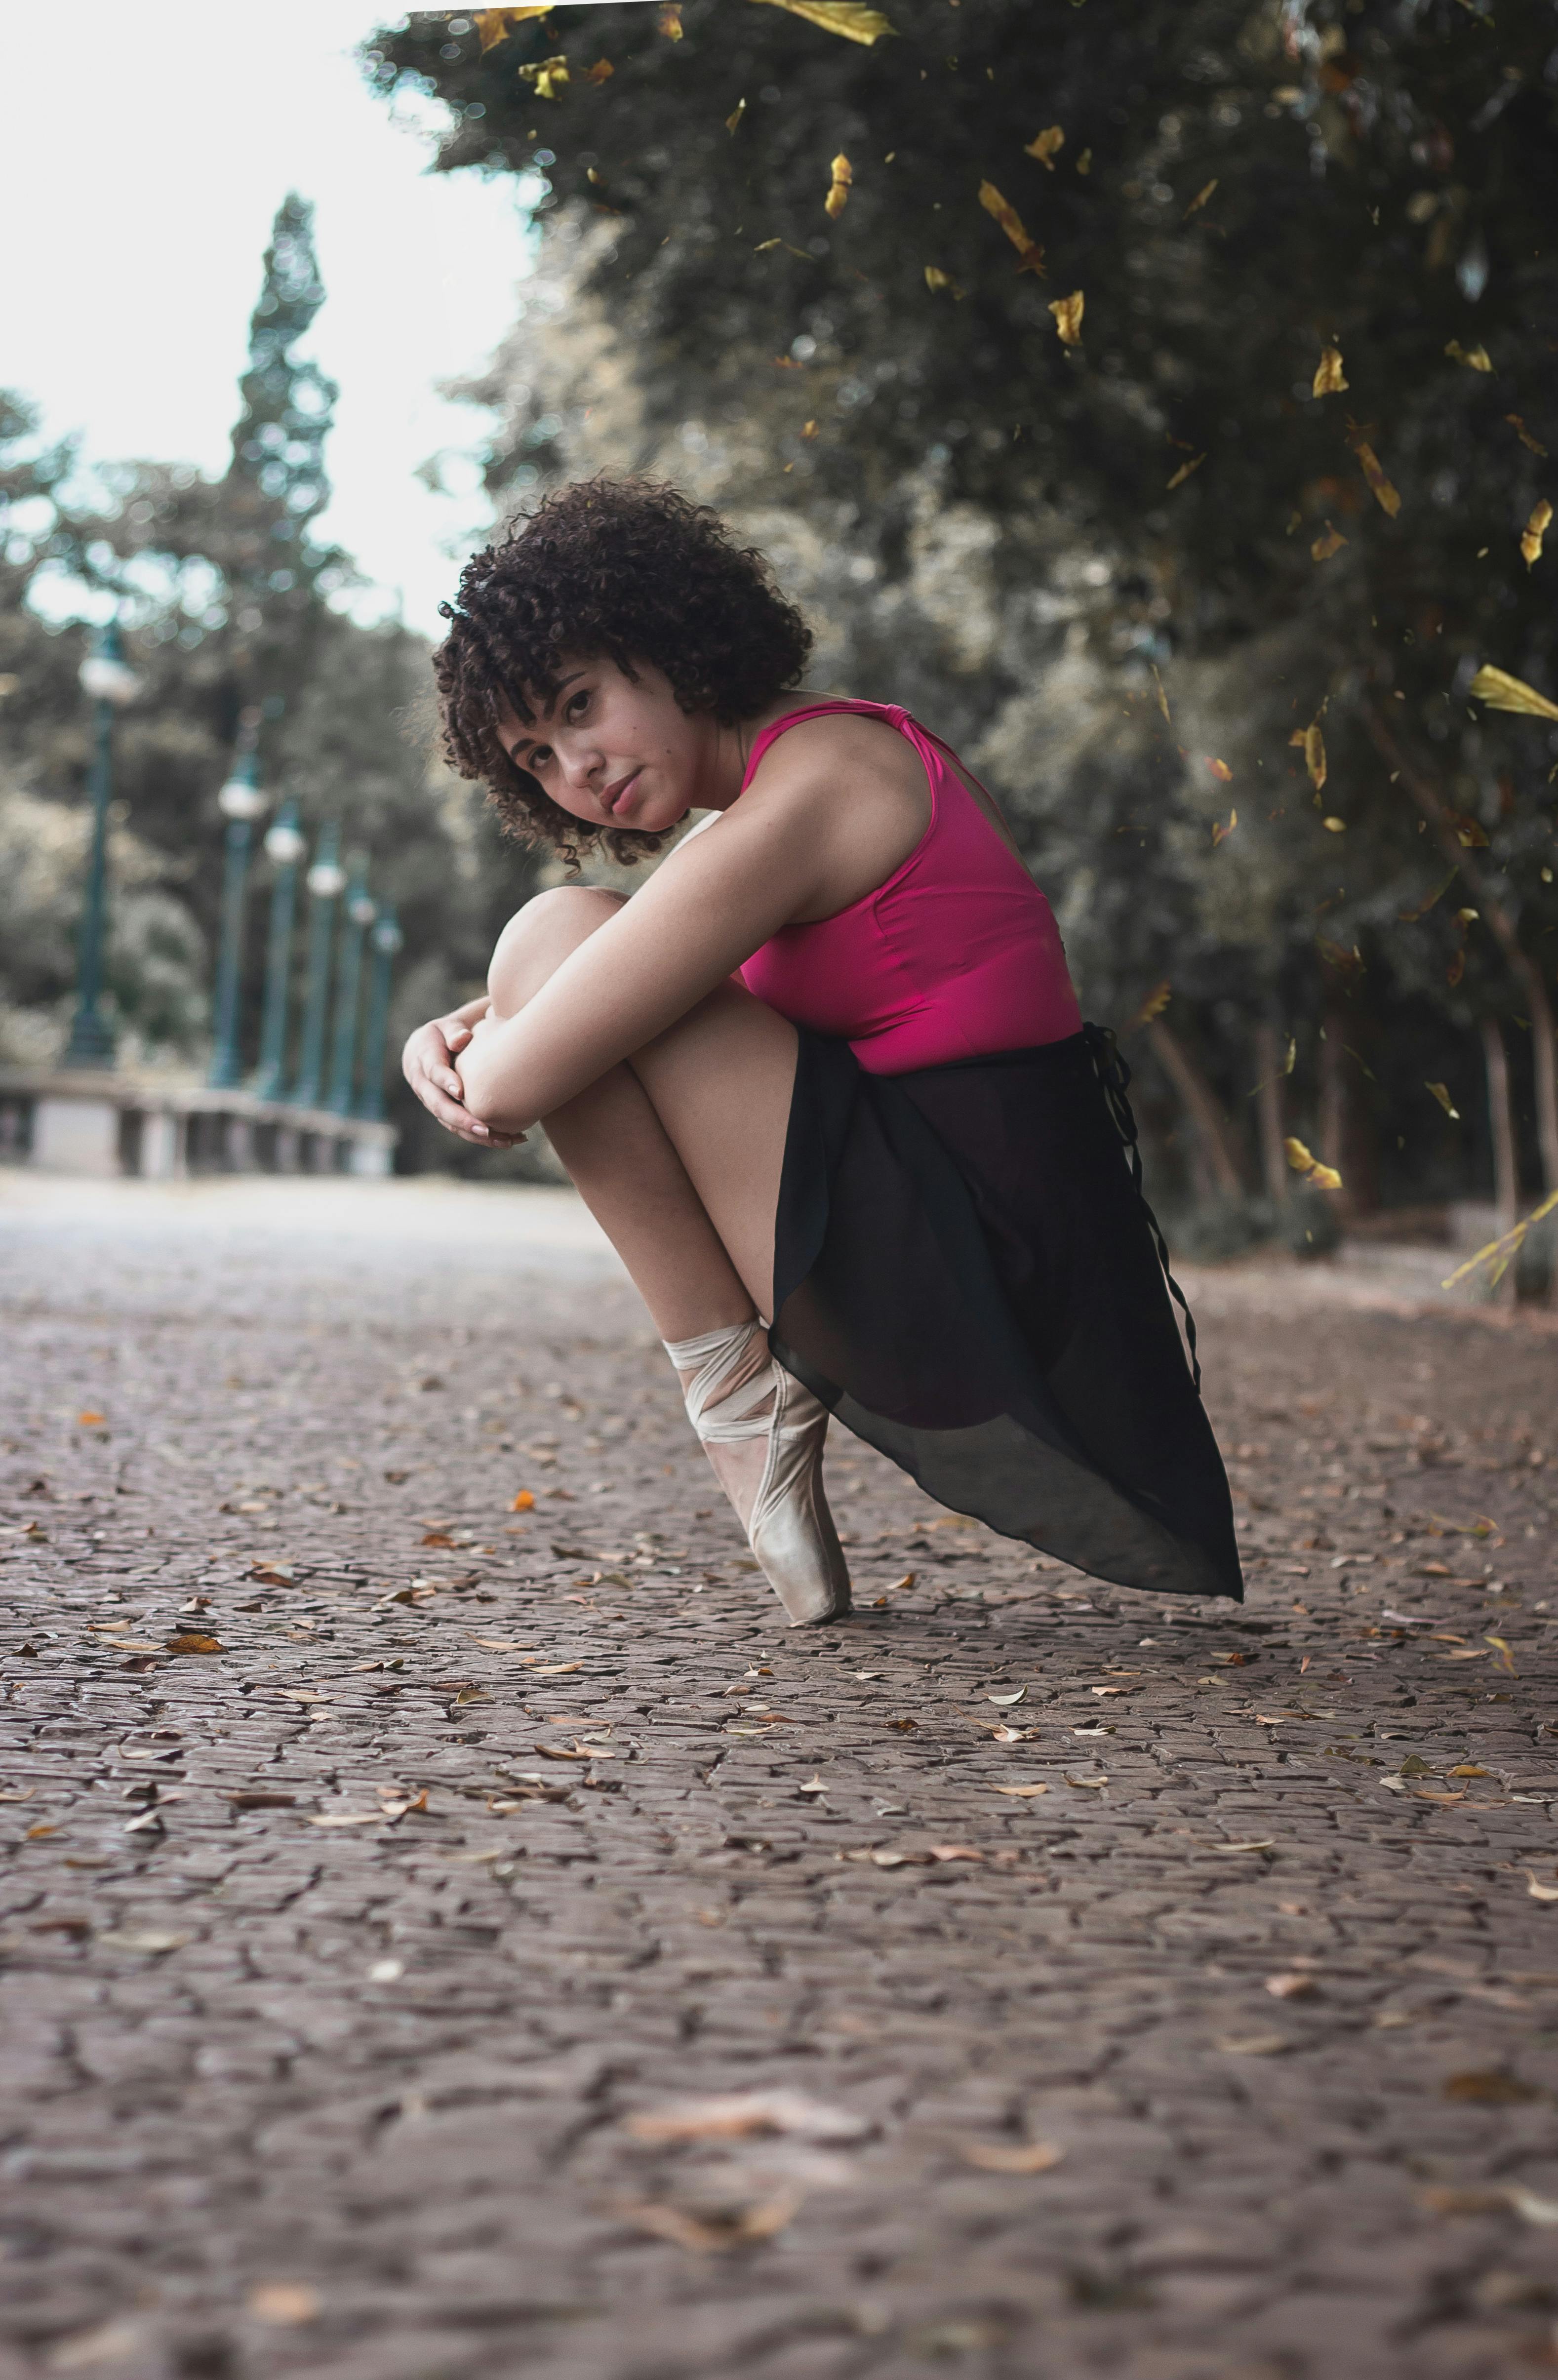 Sitting Ballerina Beside Green and Brown Trees · Free Stock